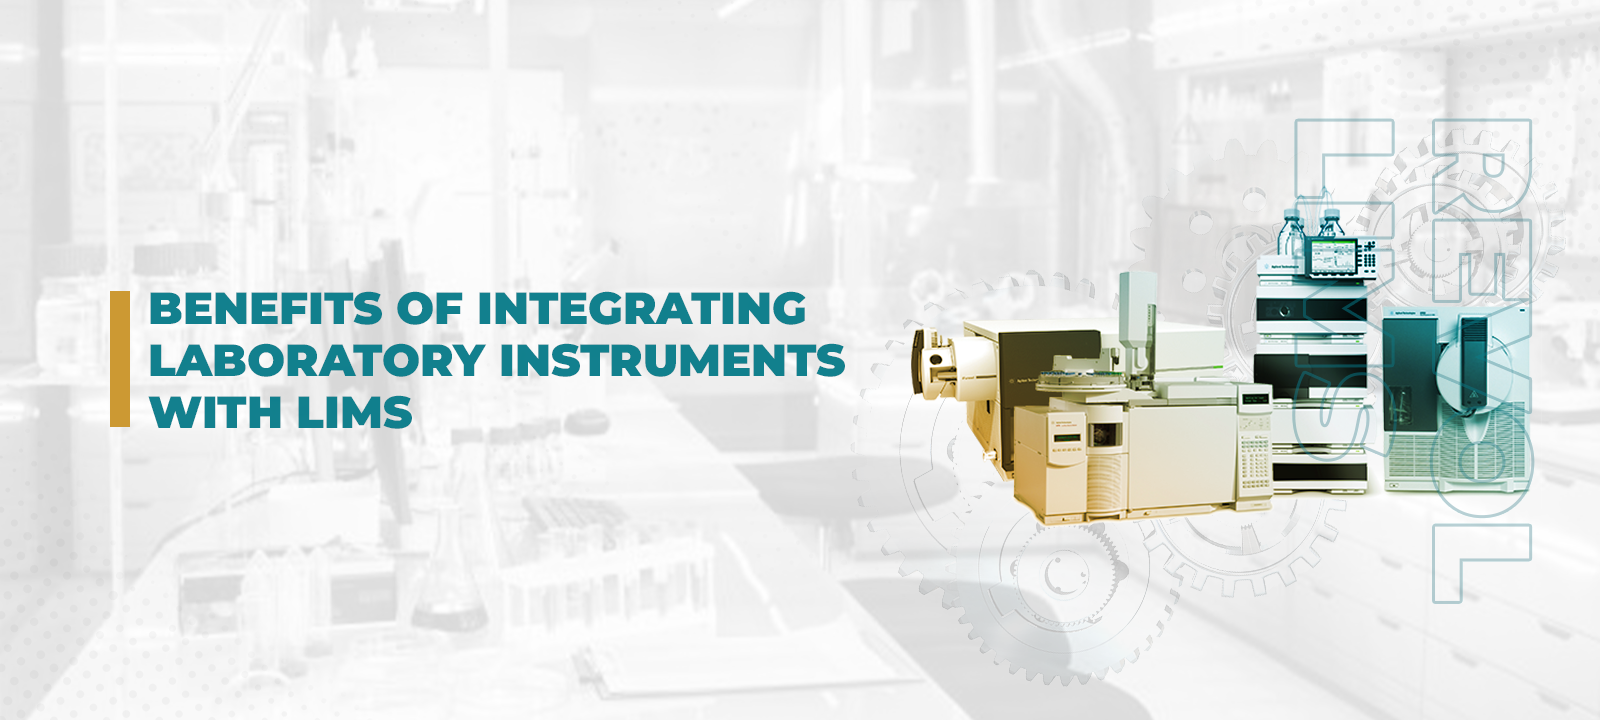 An infographic with icons symbolizing seamless integration and the benefits of integrating laboratory instruments with LIMS.